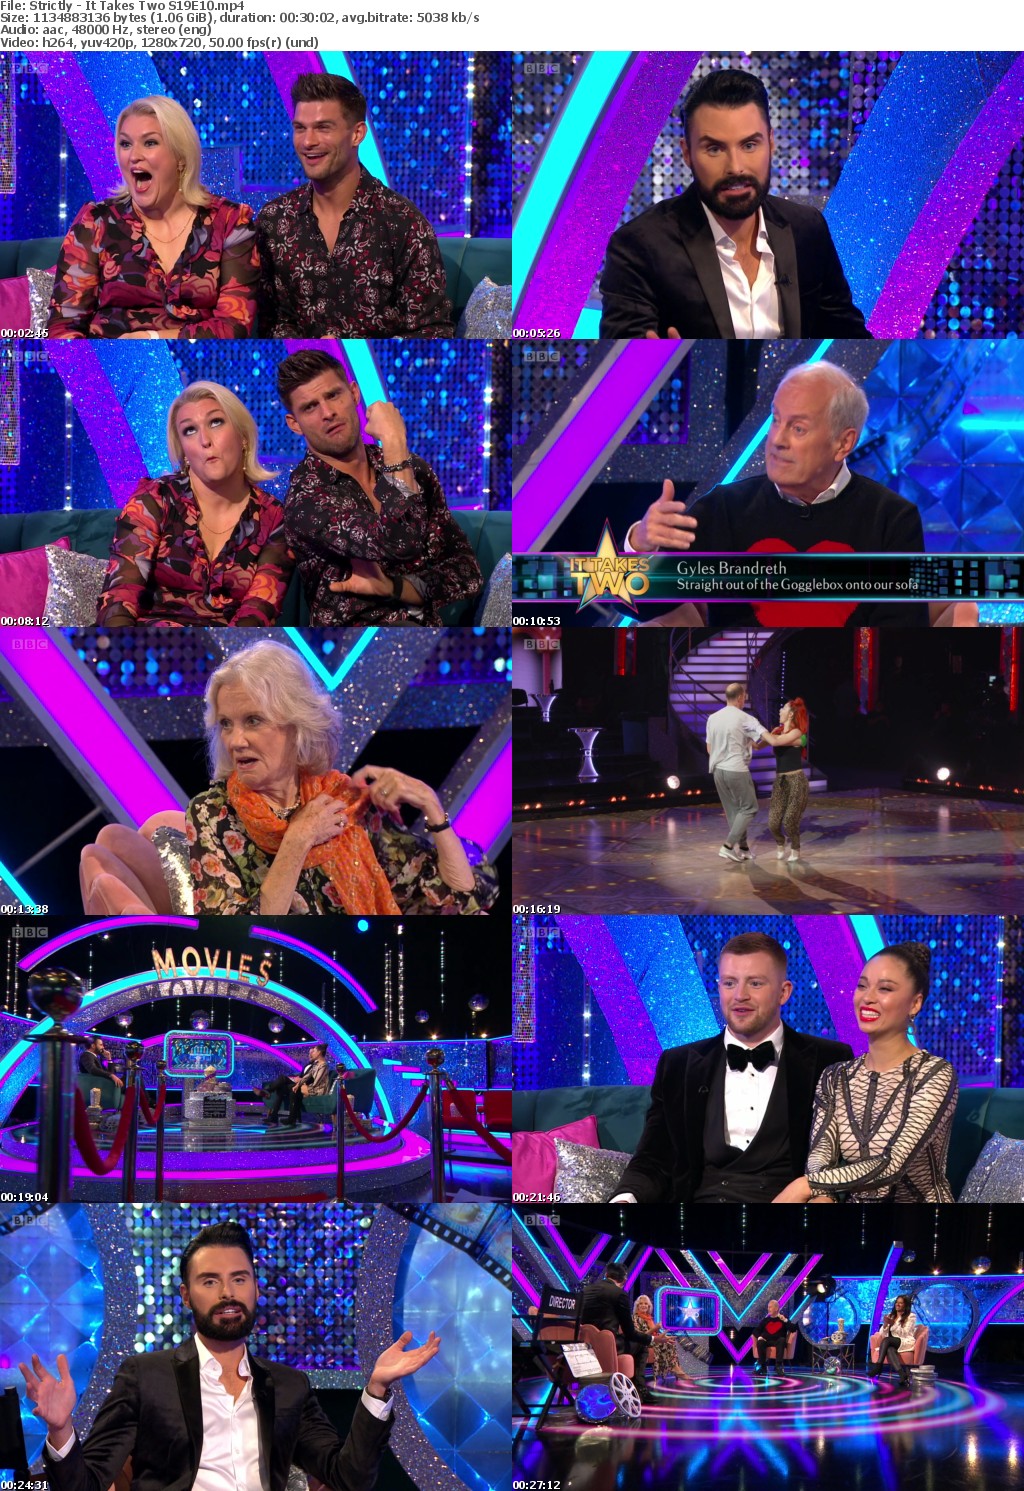 Strictly - It Takes Two S19E10 (1280x720p HD, 50fps, soft Eng subs)